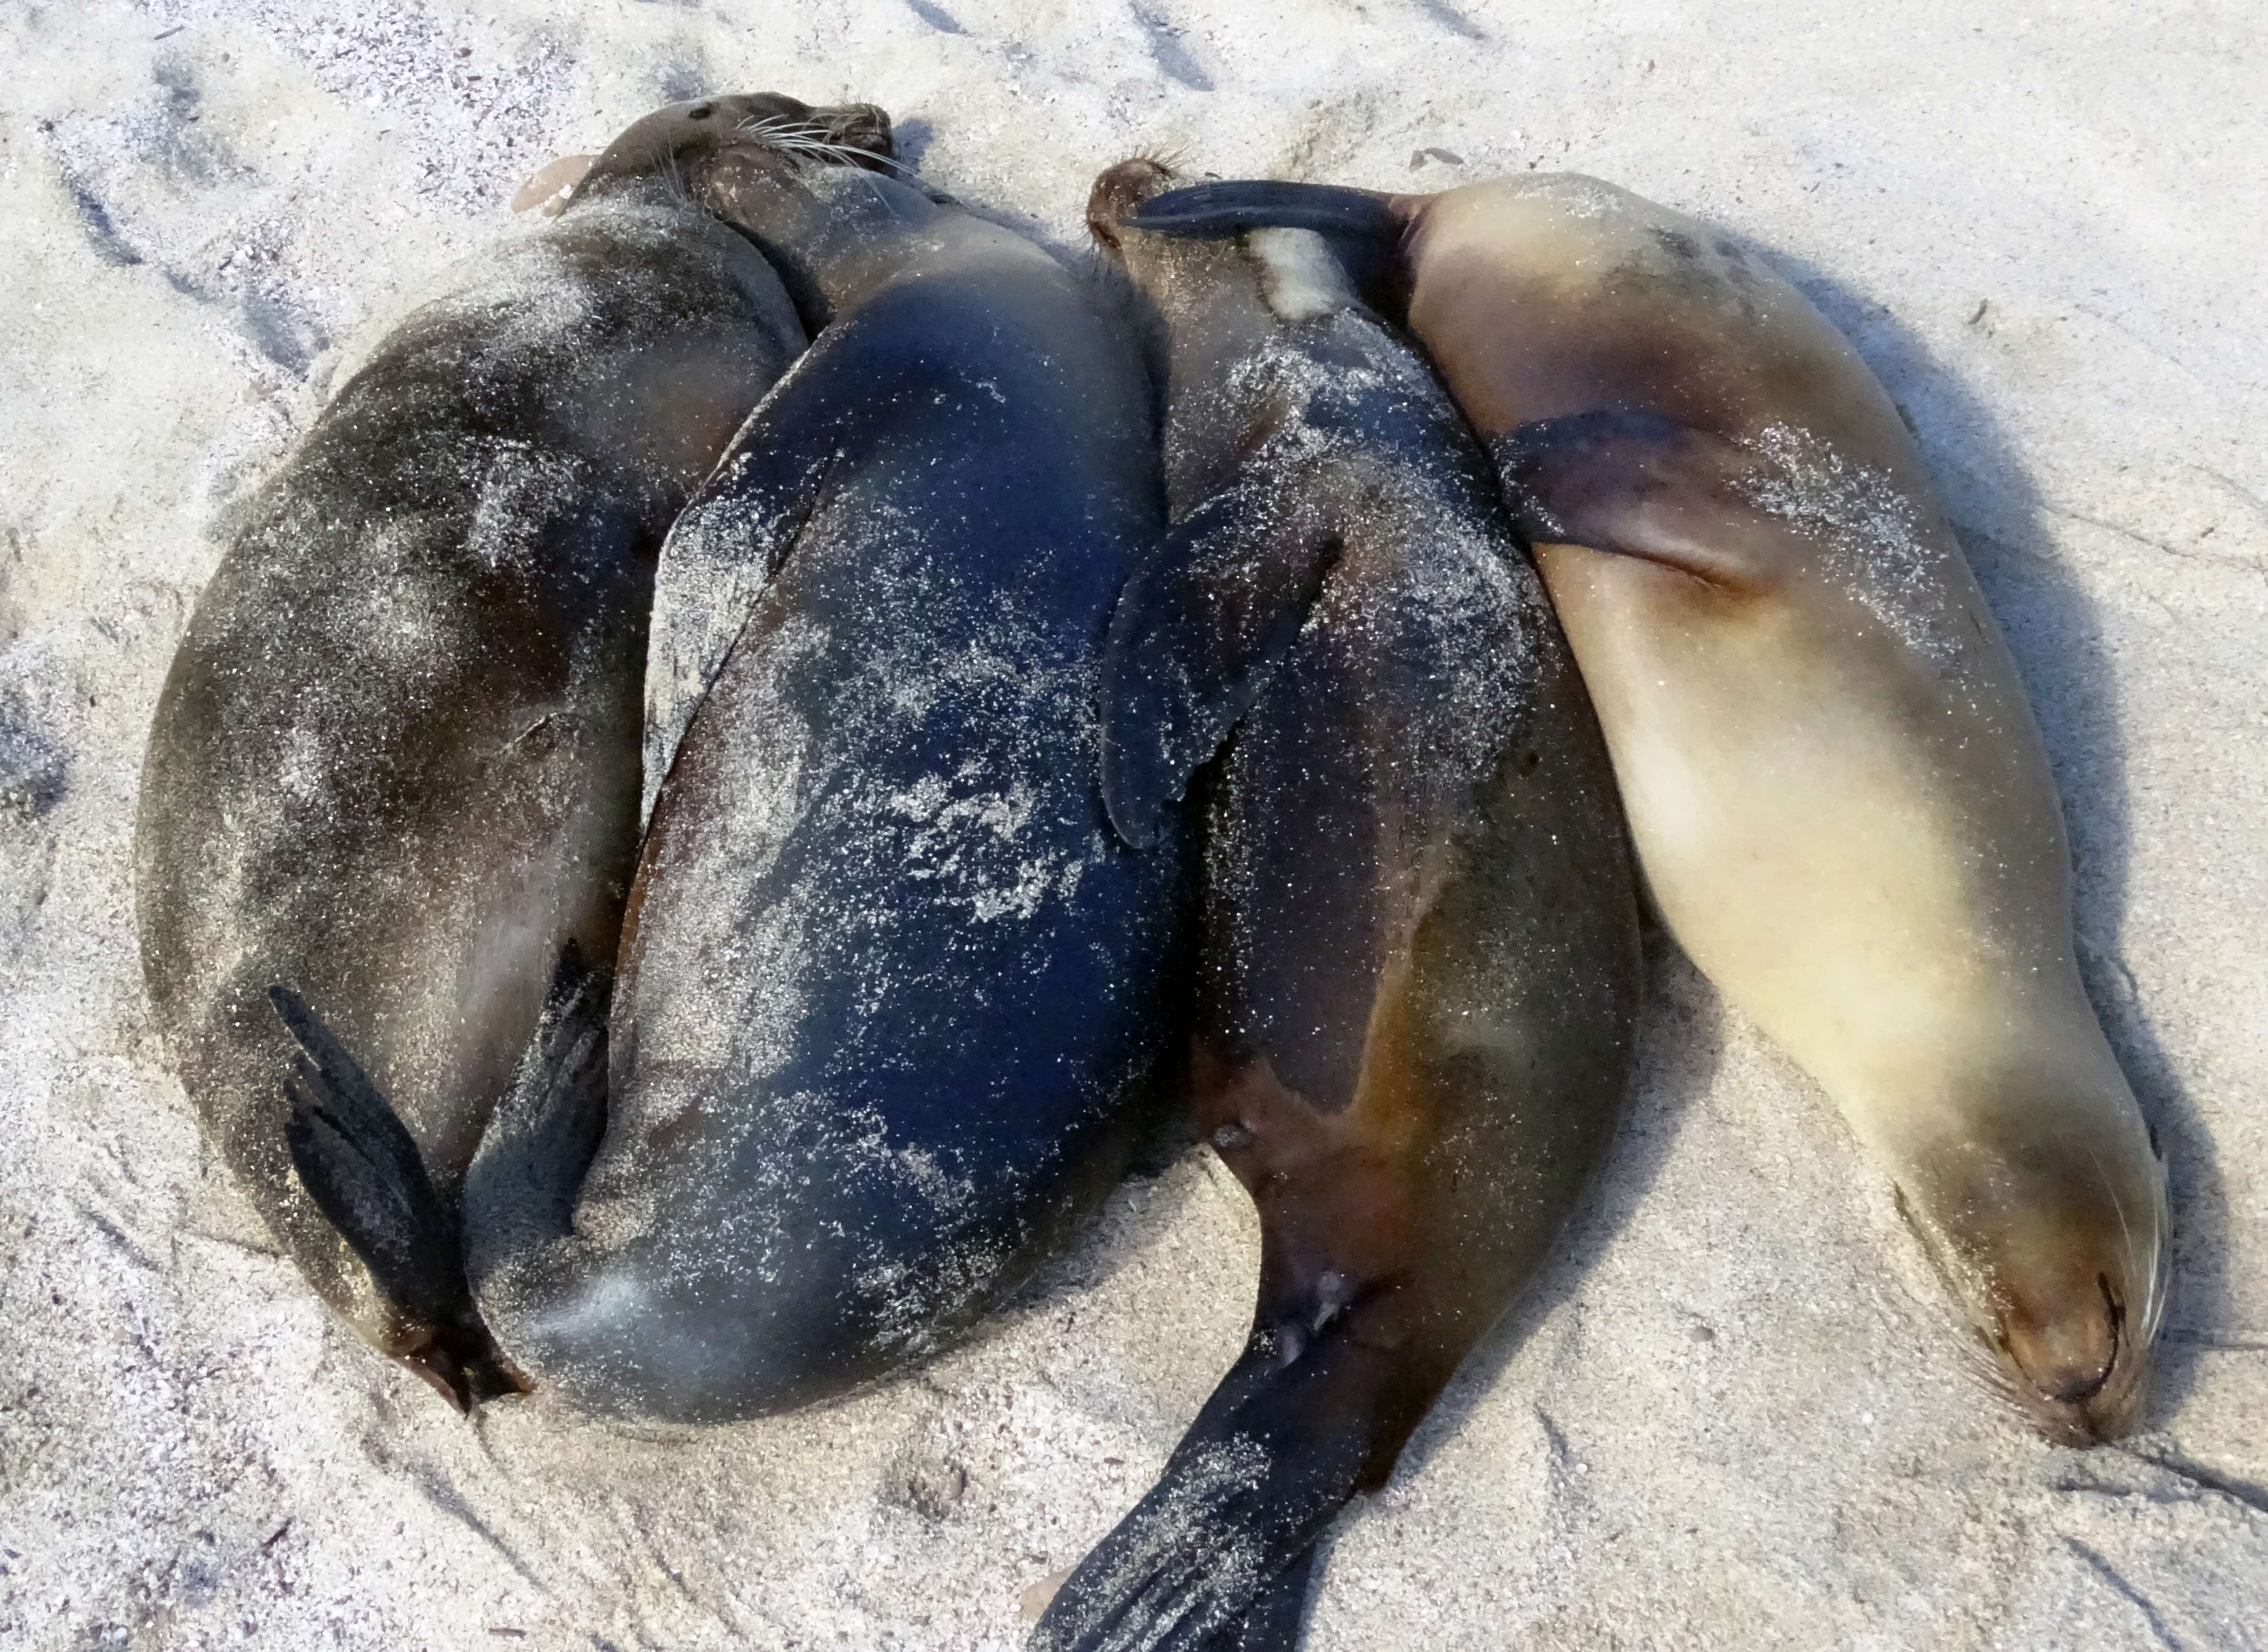 Spooning after the binge: sea lions